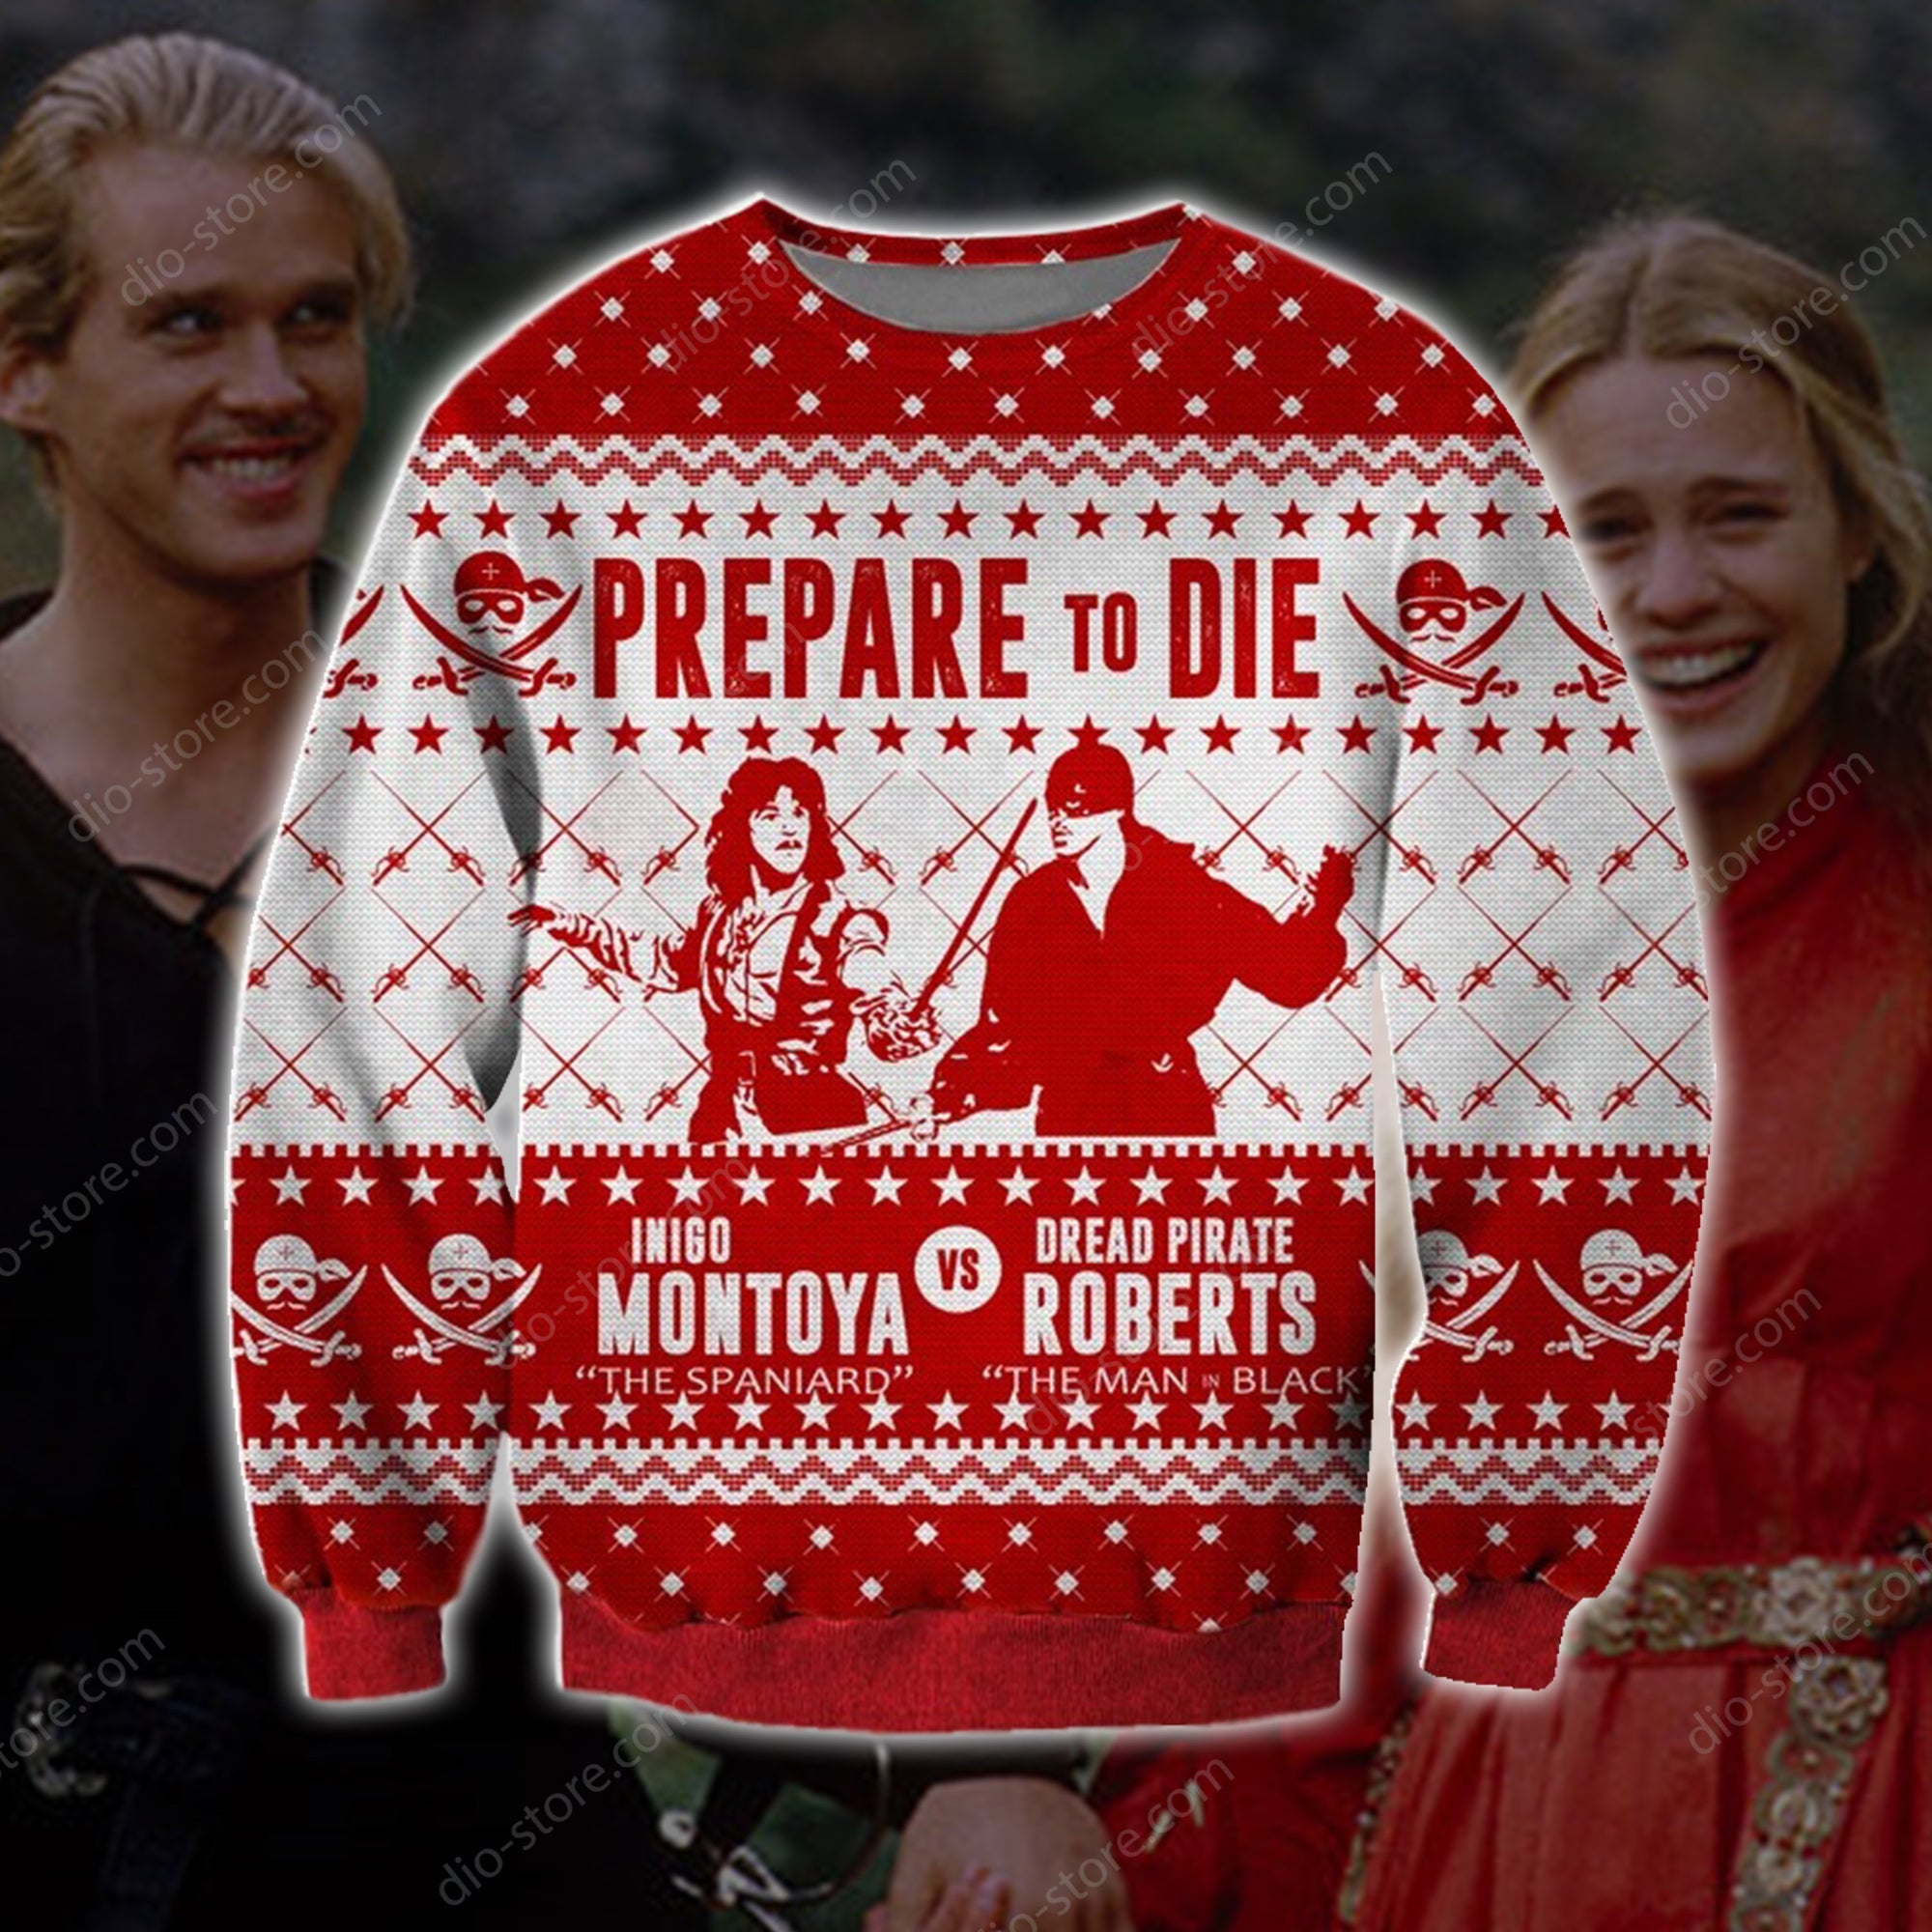 Princess Bride Funny Knitting Pattern 3D Print Ugly Christmas Sweater Hoodie All Over Printed Cint10624